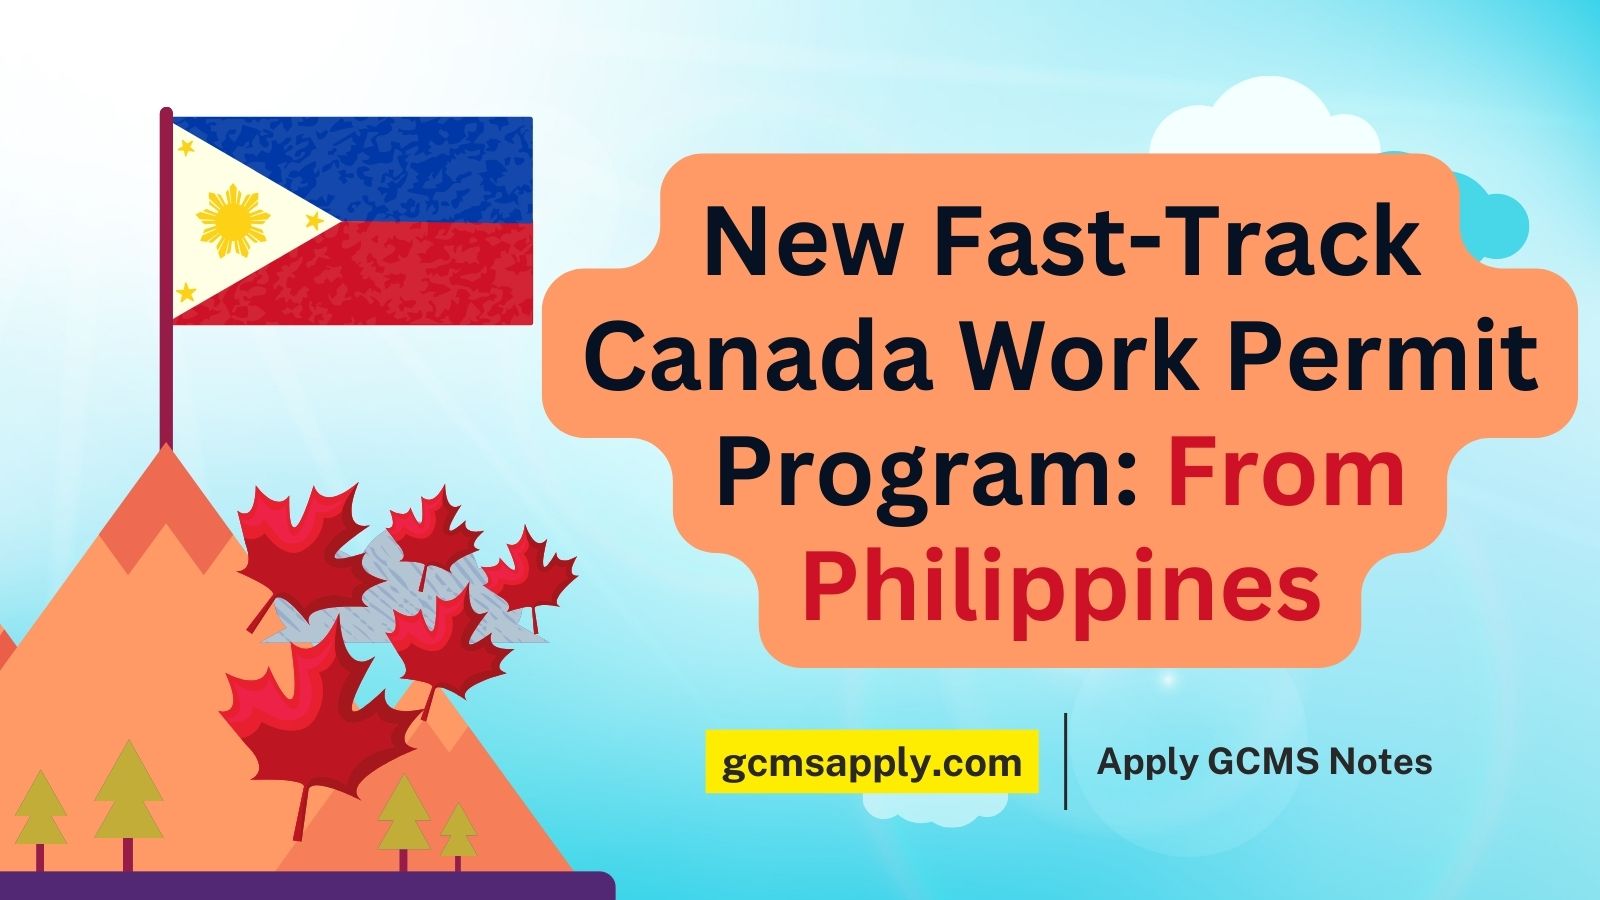 CAN Work- New Fast-Track Canada Work Permit Program From Philippines